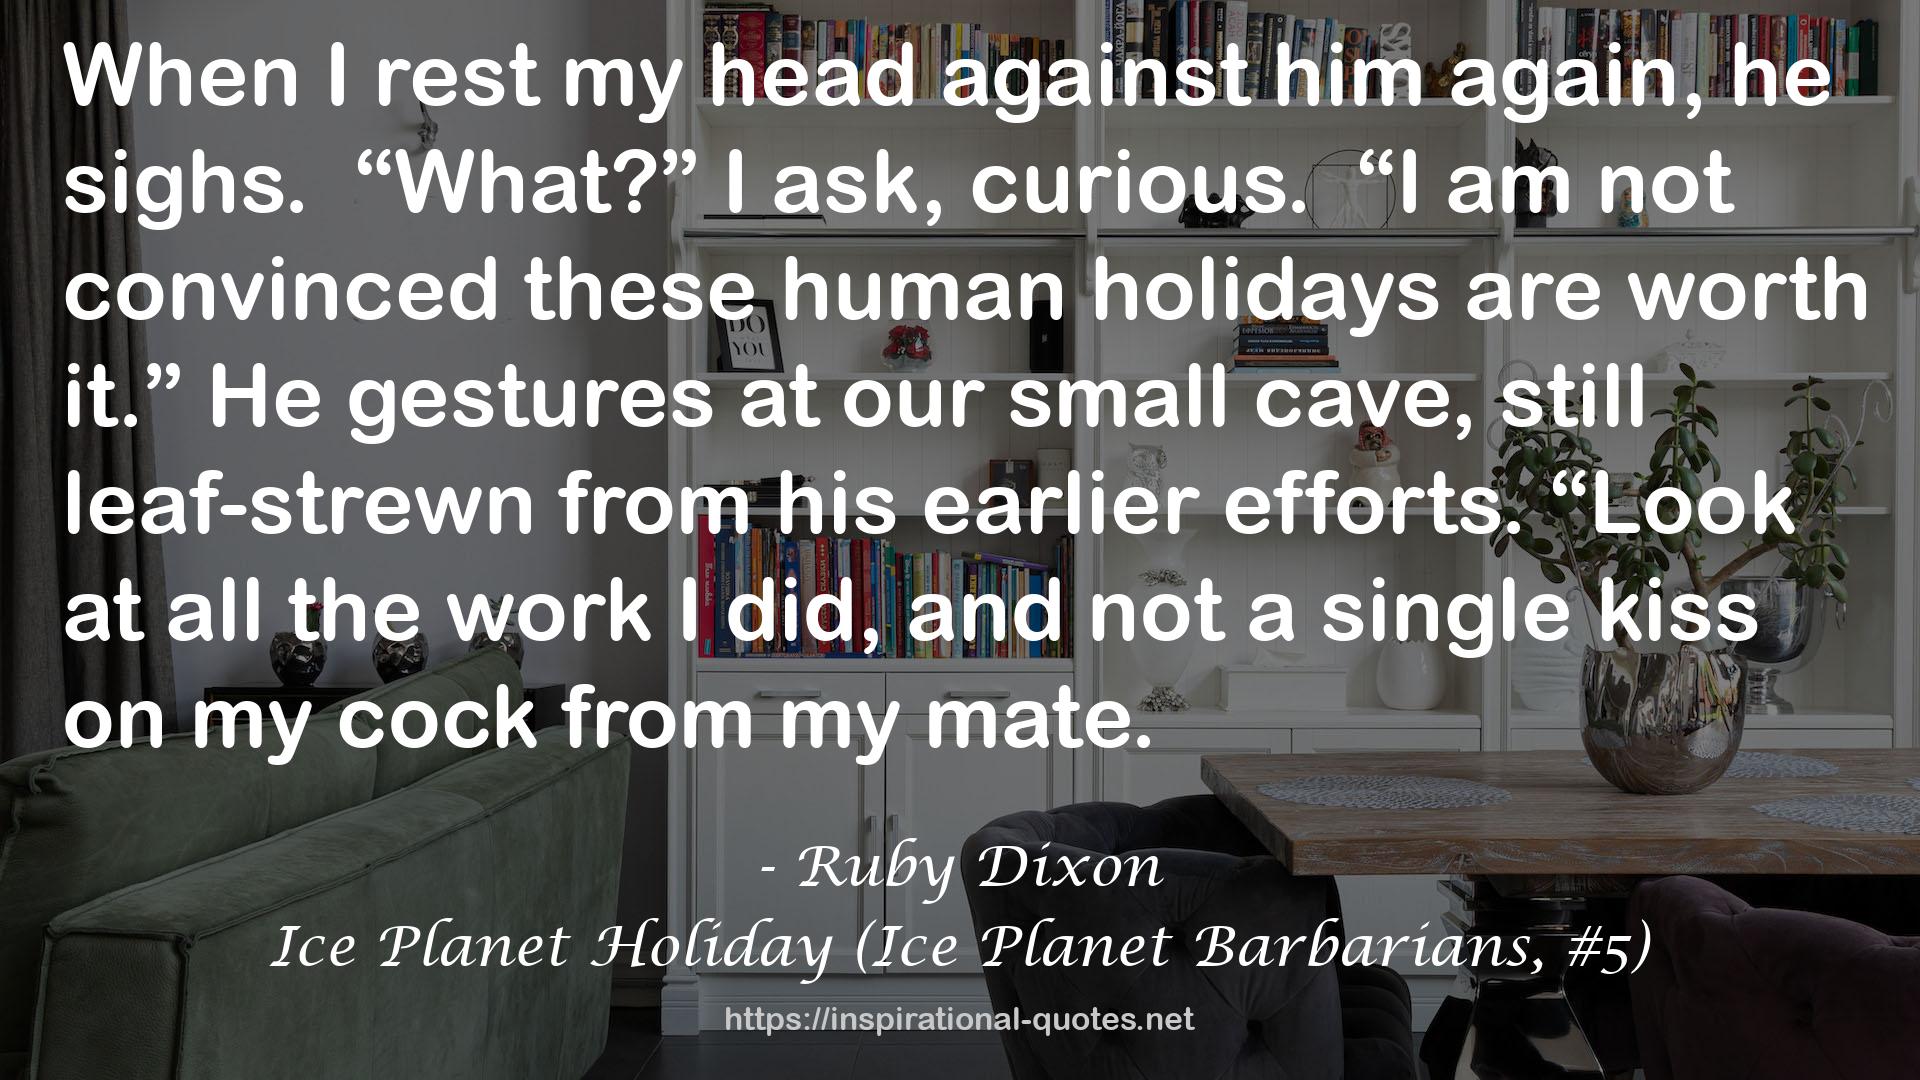 Ice Planet Holiday (Ice Planet Barbarians, #5) QUOTES